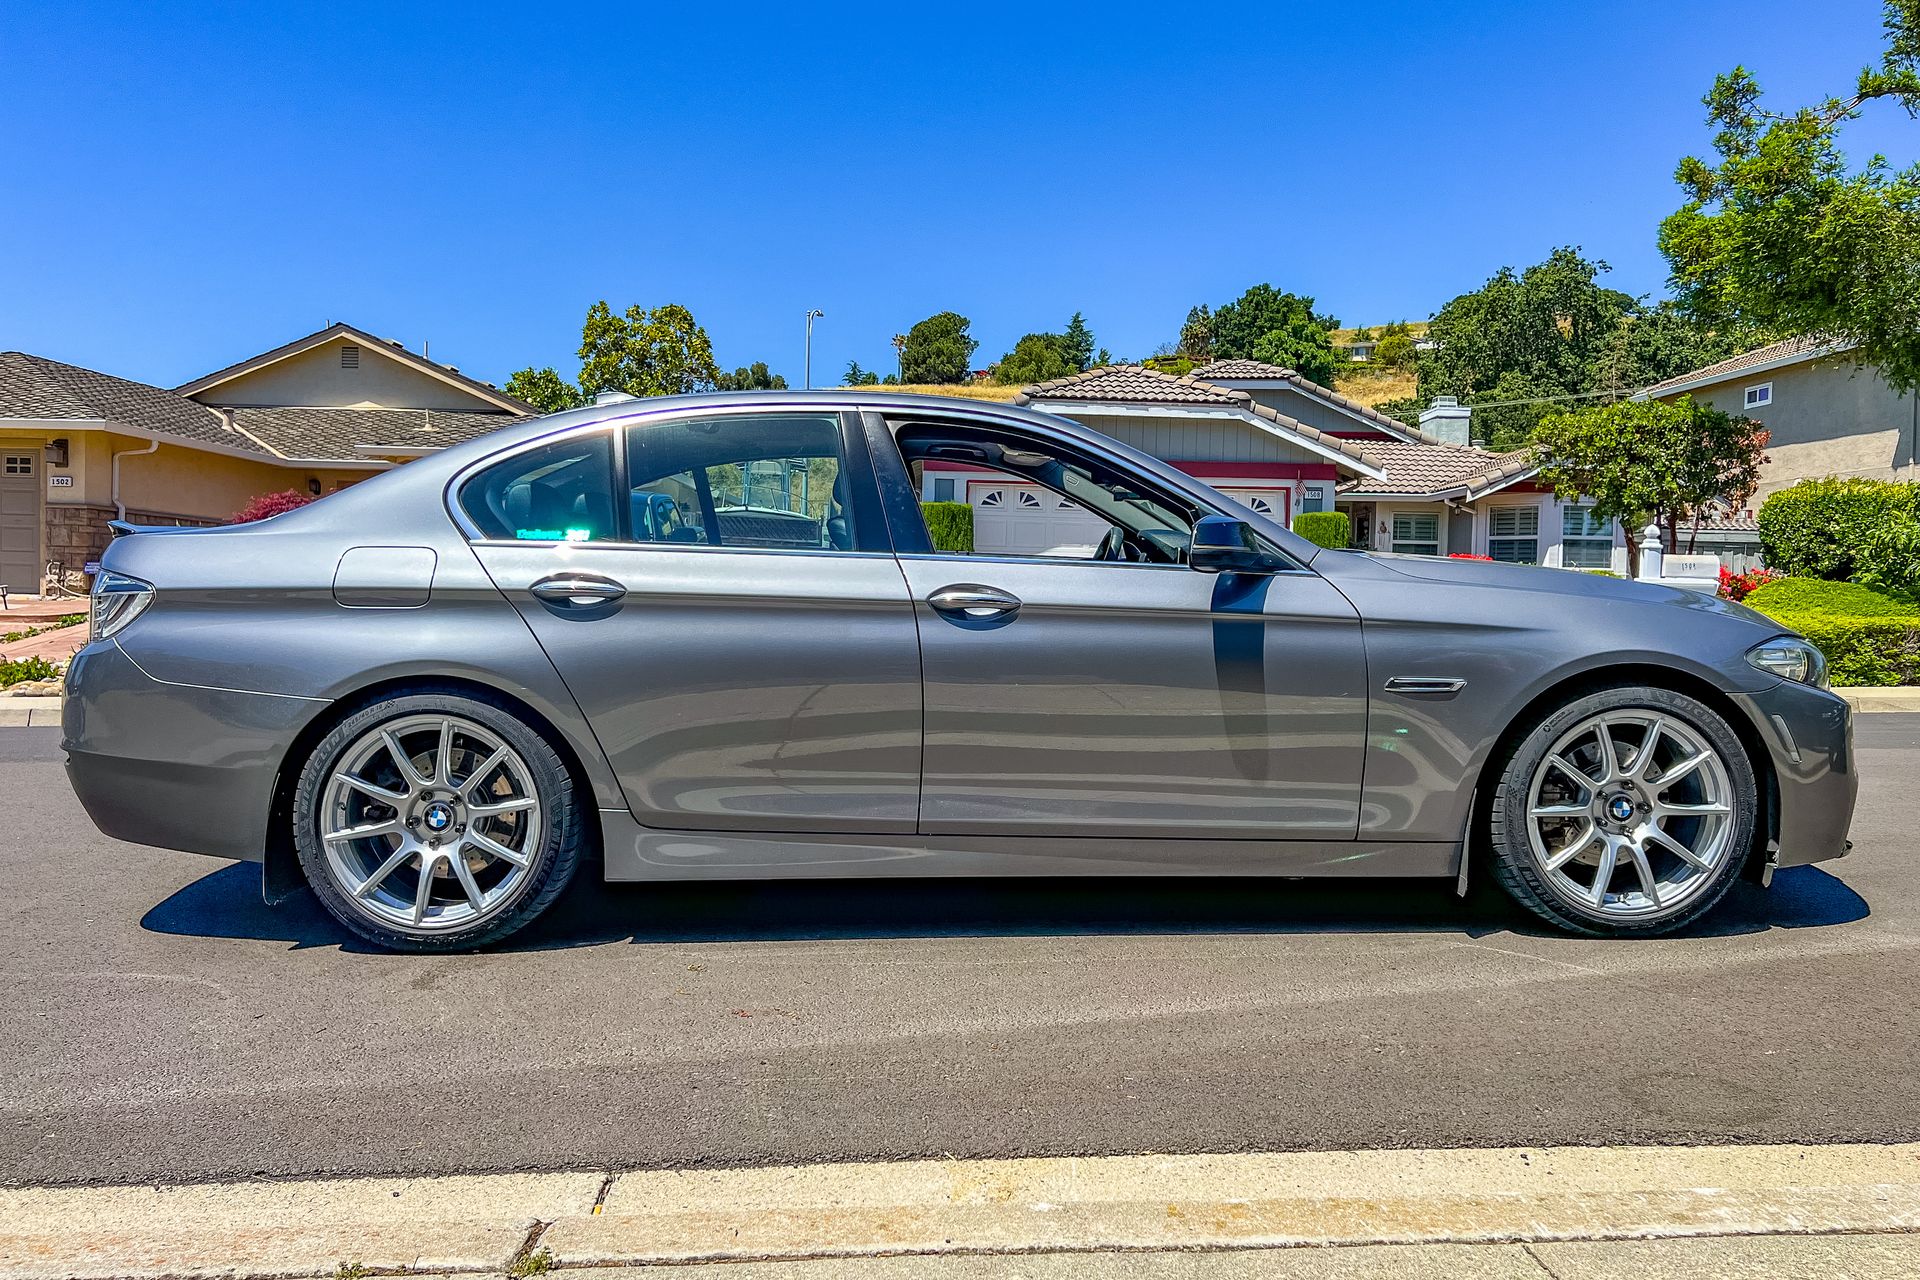 BMW F10 Sedan 5 Series with 19" SM-10 in Race Silver